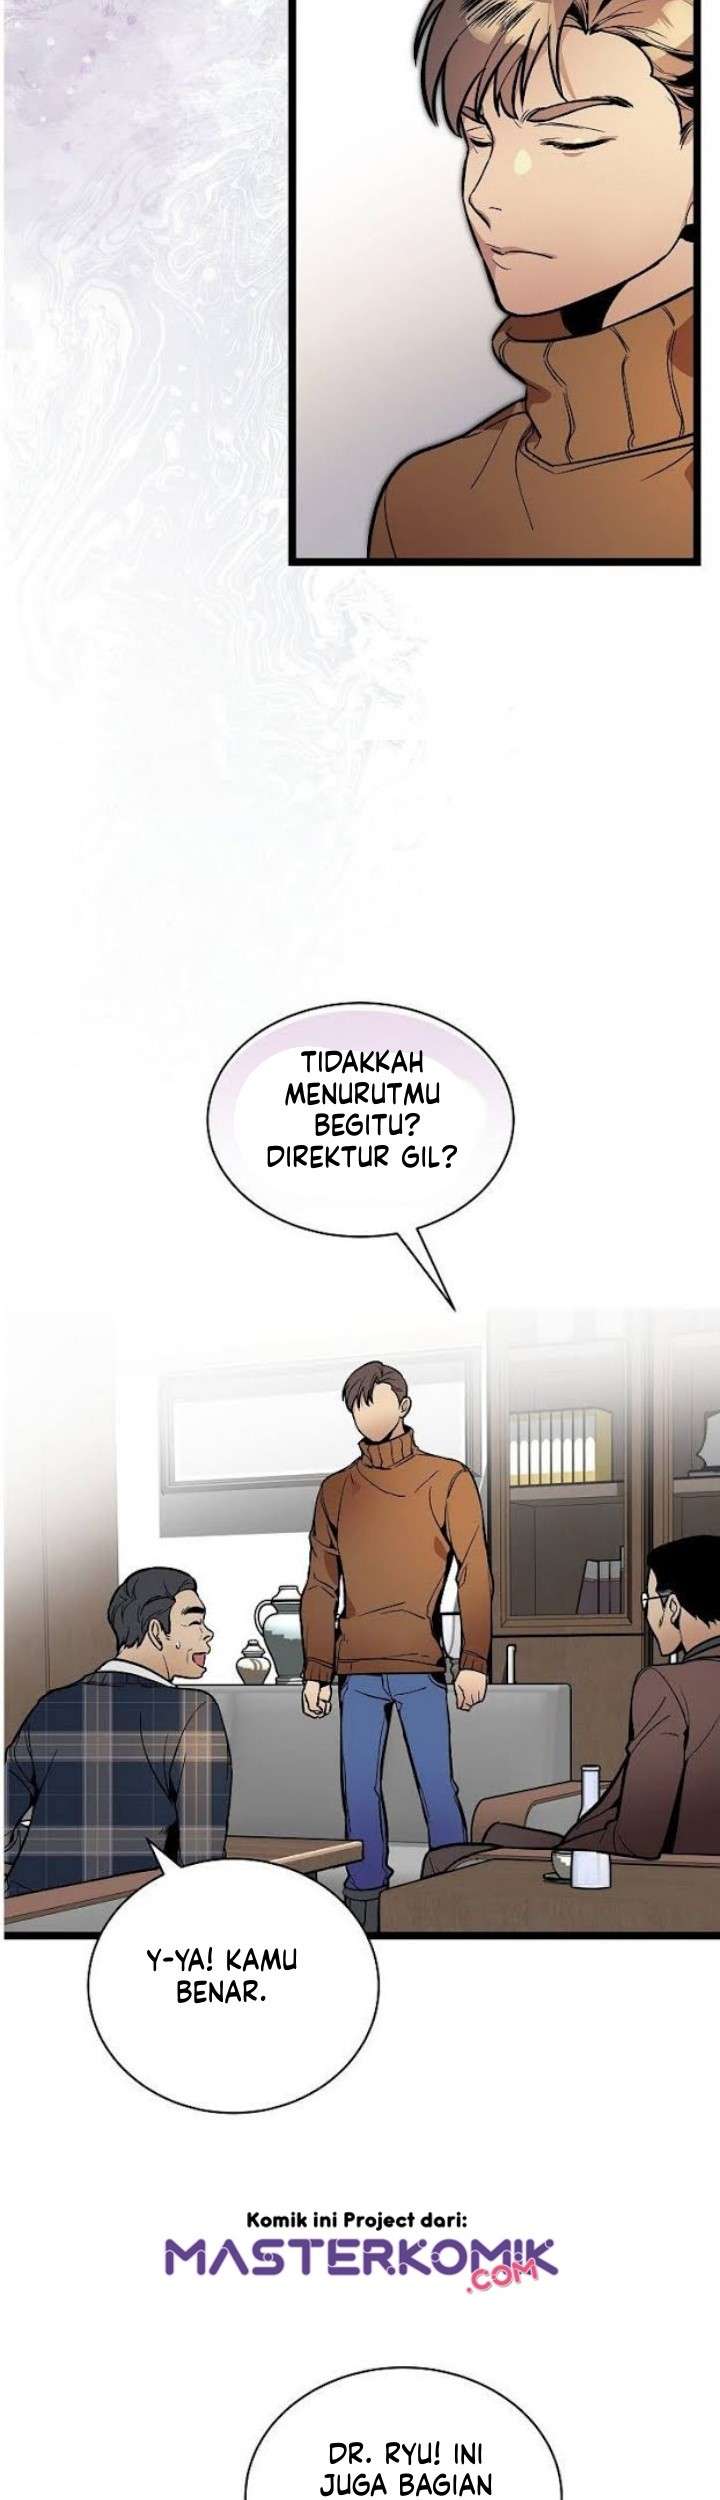 I Am Alone Genius DNA Chapter 32